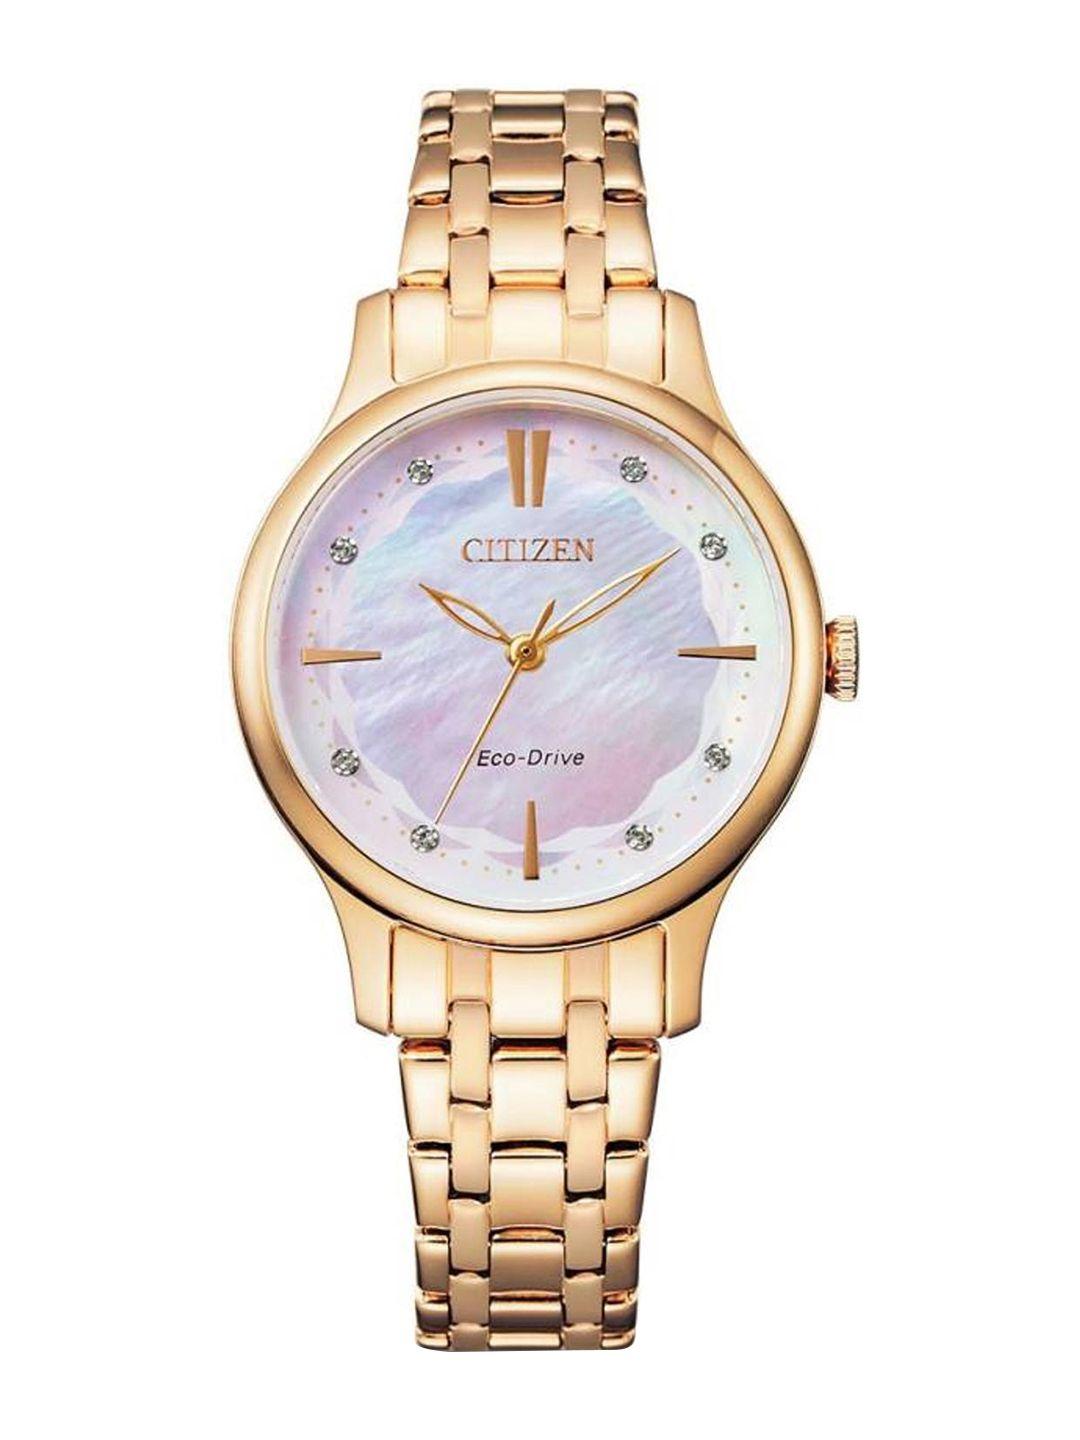 citizen women stainless steel bracelet style straps analogue light powered watch